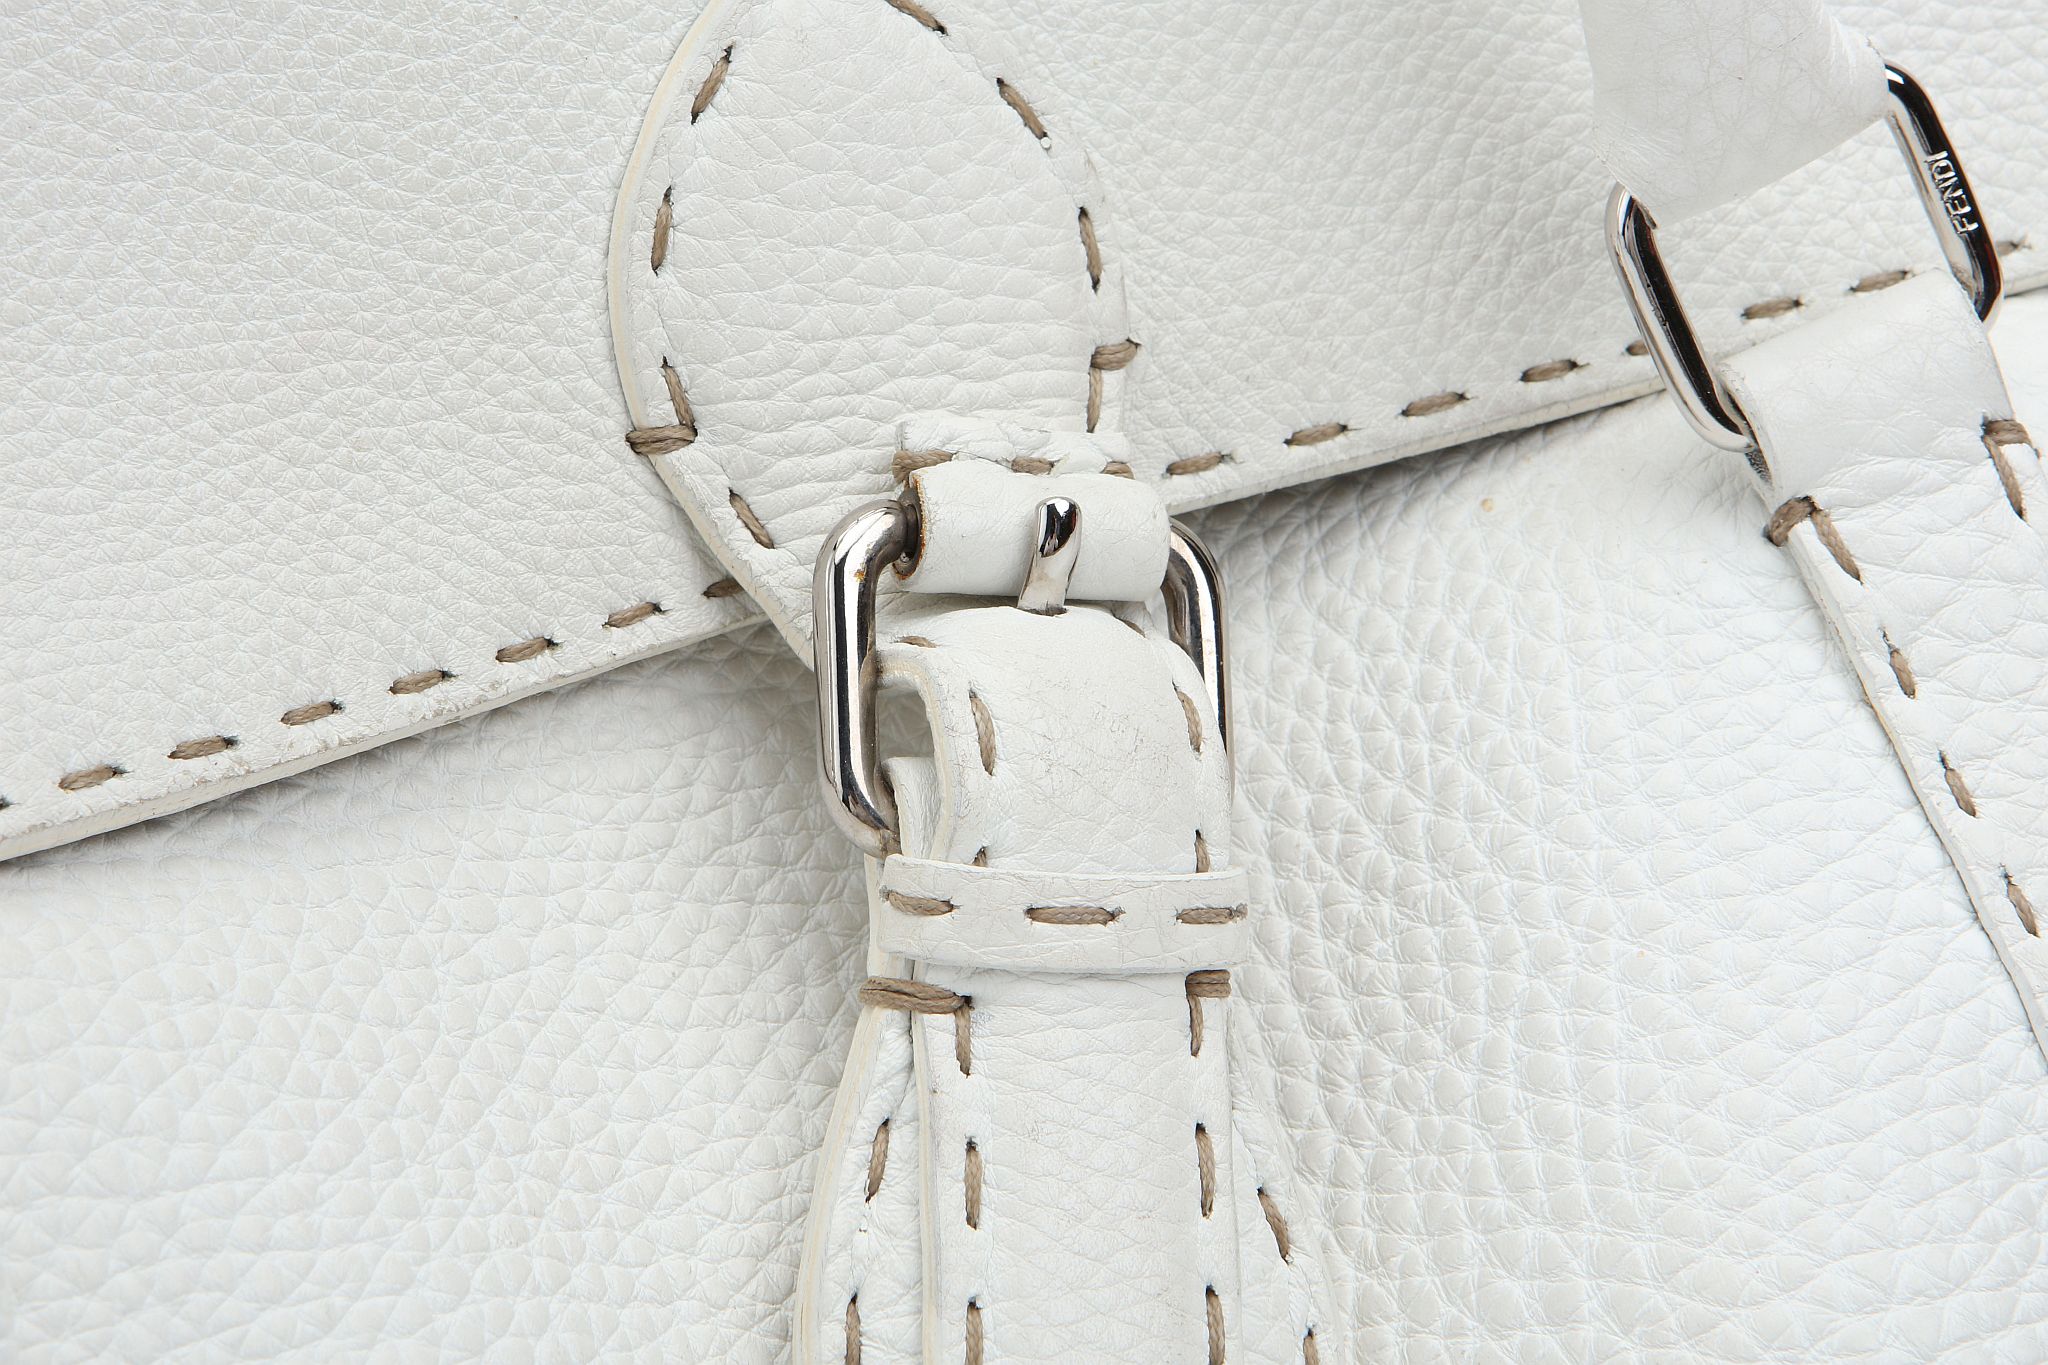 FENDI SELLERIA SHOULDER BAG, white stitched leather with silver tone hardware, 35cm wide, 30cm high, - Image 3 of 12